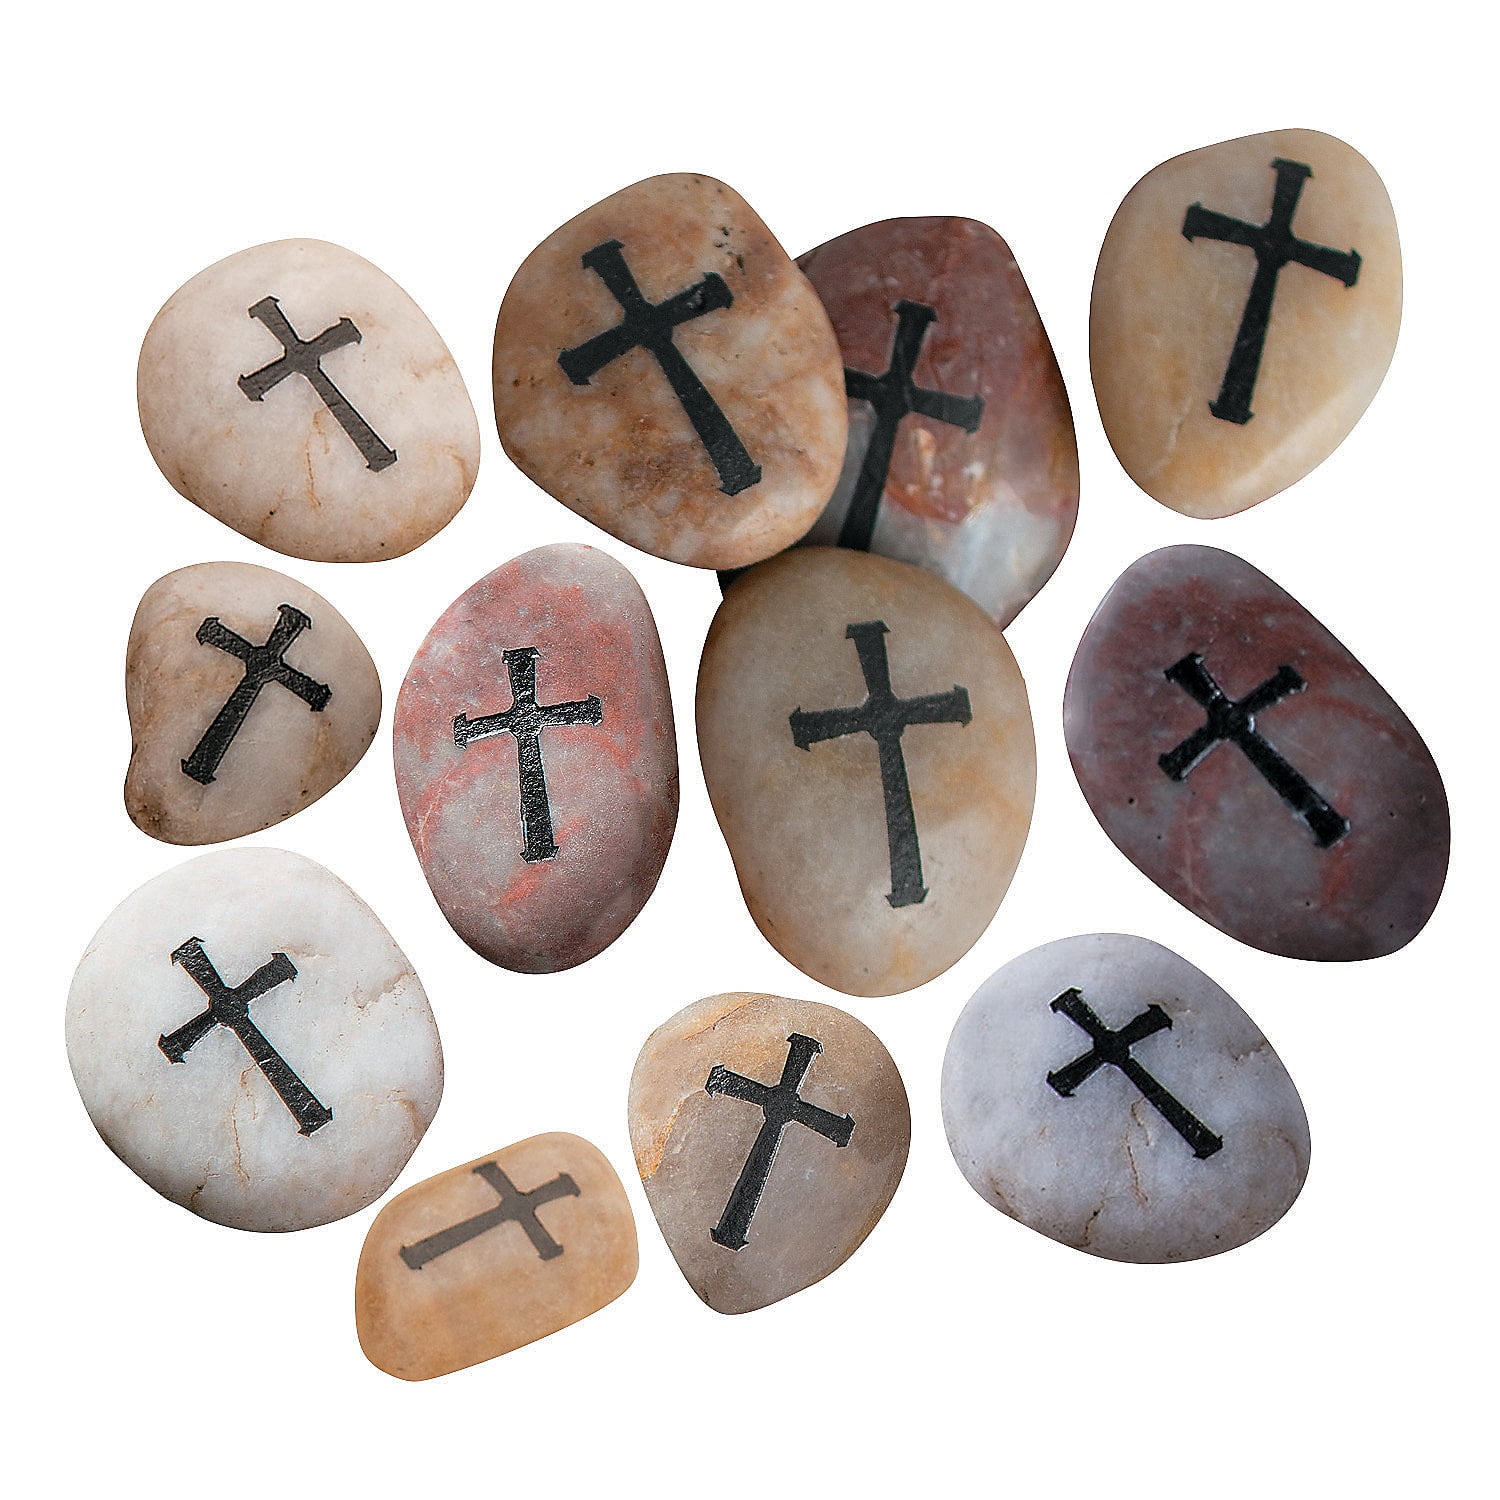 96 Cross Engraved Religious Worry Stones Party Favor Backpack Pocket Fidget 